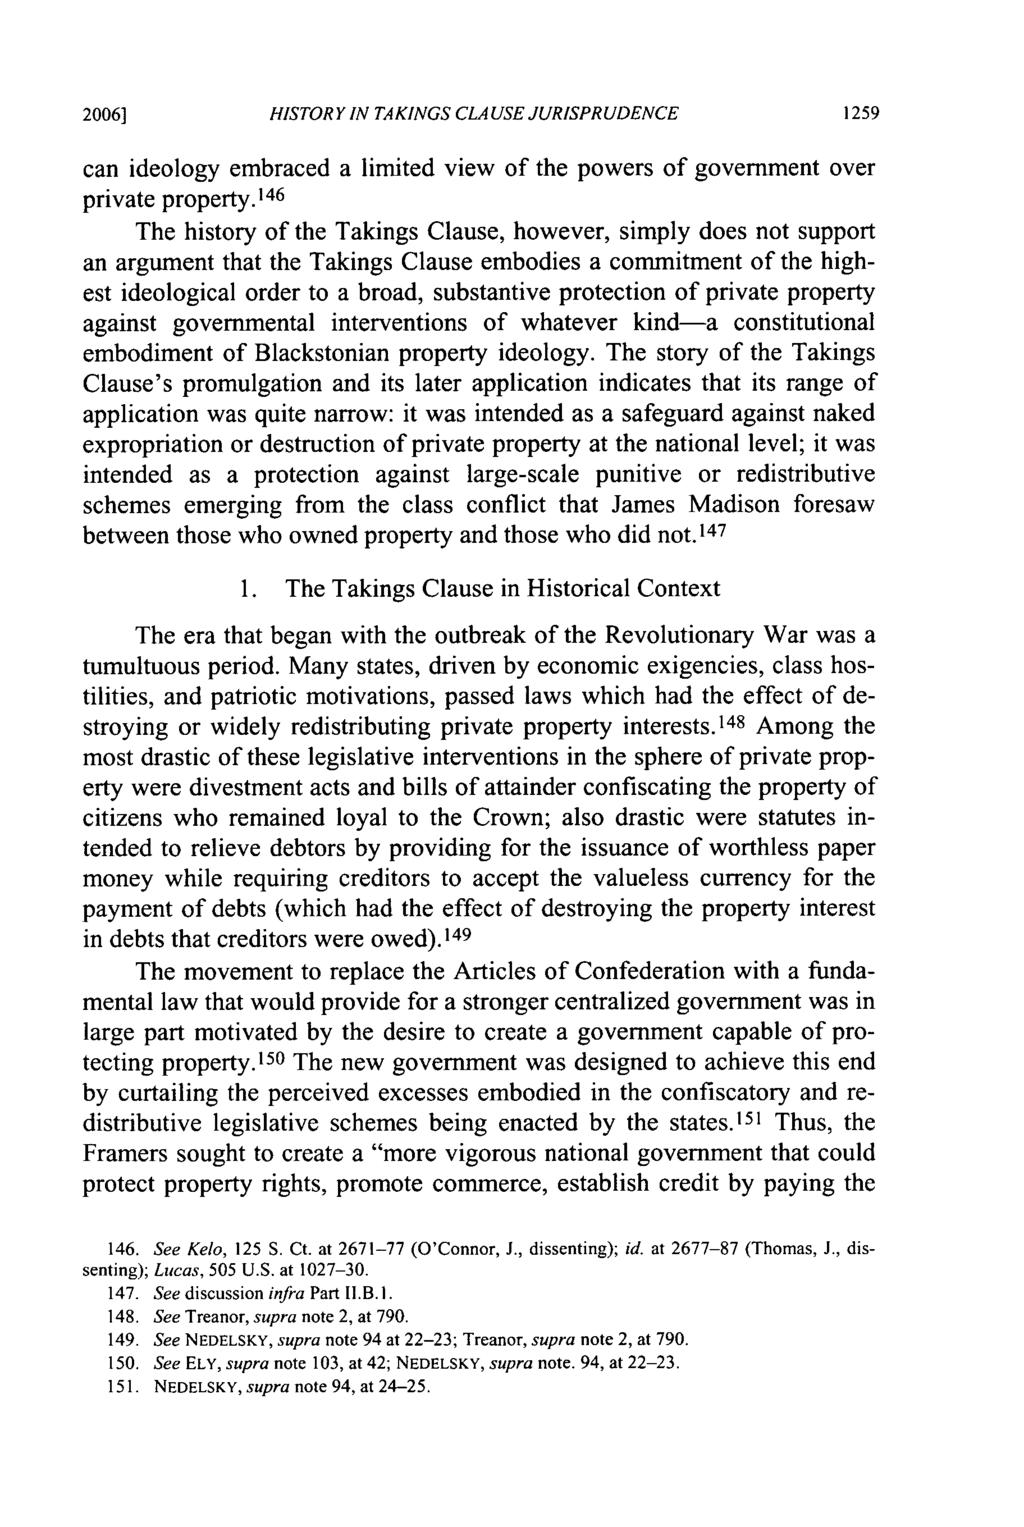 2006] HISTORY IN TAKINGS CLAUSE JURISPRUDENCE can ideology embraced a limited view of the powers of government over private property.